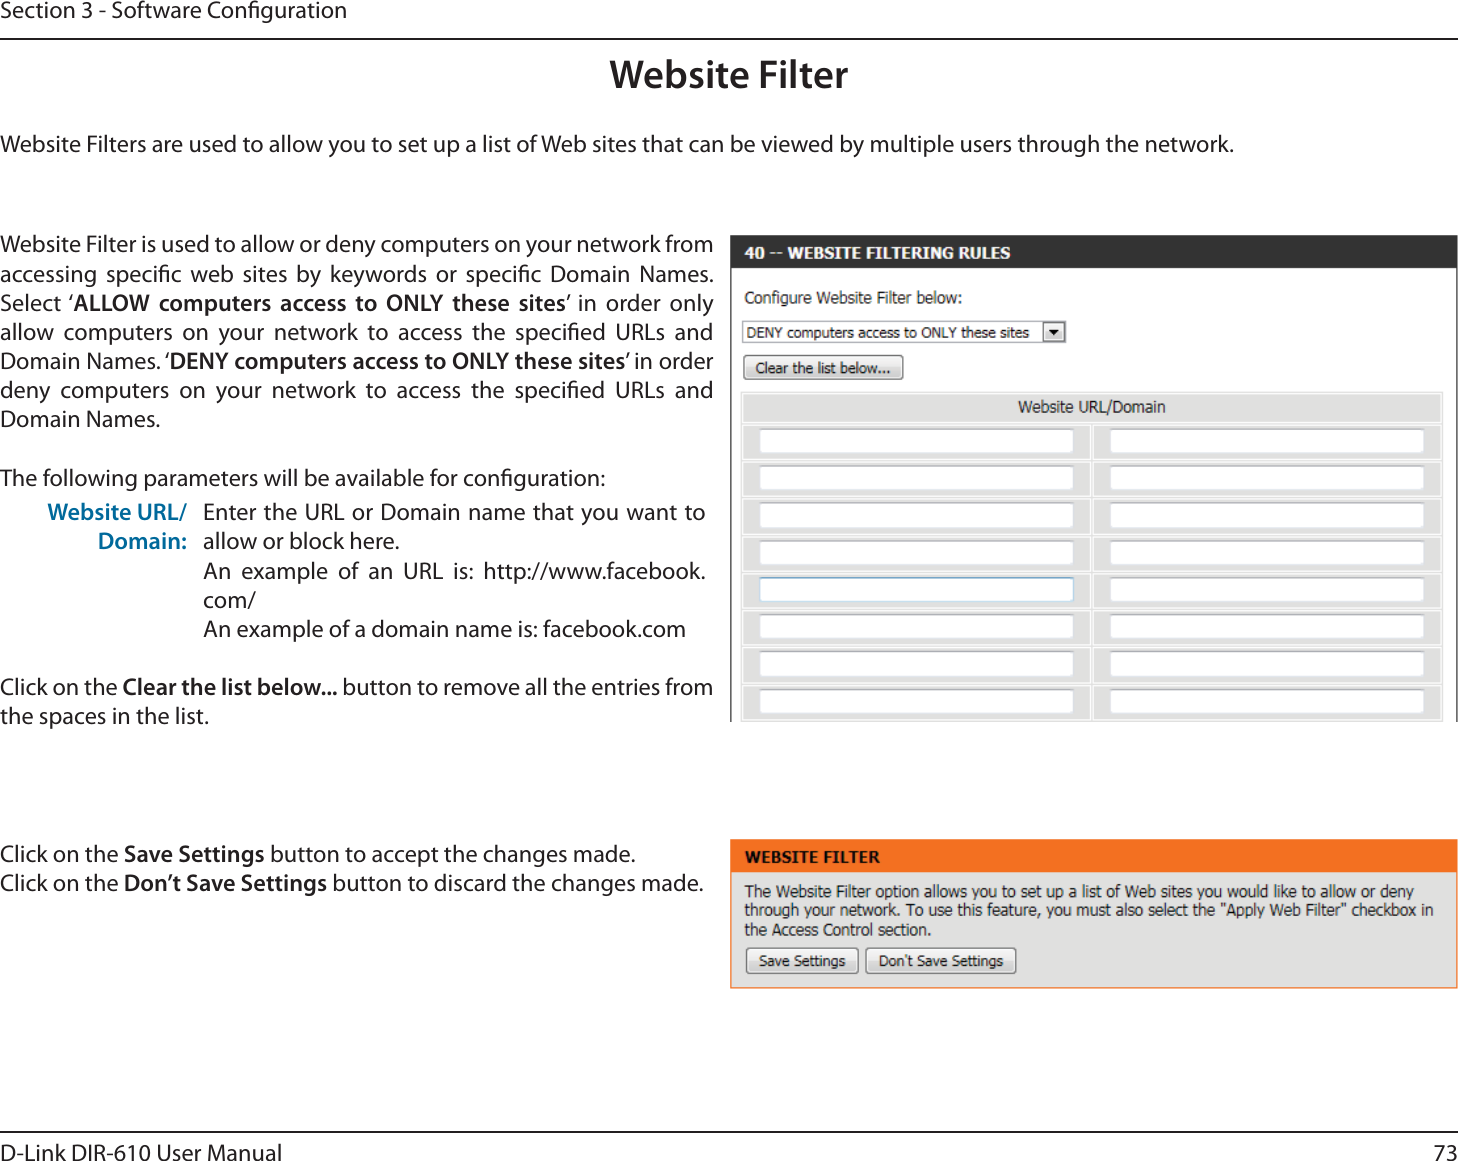 73D-Link DIR-610 User ManualSection 3 - Software CongurationWebsite FilterWebsite Filters are used to allow you to set up a list of Web sites that can be viewed by multiple users through the network.Website Filter is used to allow or deny computers on your network from accessing specic web sites by keywords or specic Domain Names. Select ‘ALLOW computers access to ONLY these sites’ in order only allow computers on your network to access the specied URLs and Domain Names. ‘DENY computers access to ONLY these sites’ in order deny computers on your network to access the specied URLs and Domain Names.The following parameters will be available for conguration:Website URL/Domain:Enter the URL or Domain name that you want to allow or block here.An example of an URL is: http://www.facebook.com/An example of a domain name is: facebook.comClick on the Clear the list below... button to remove all the entries from the spaces in the list.Click on the Save Settings button to accept the changes made.Click on the Don’t Save Settings button to discard the changes made.